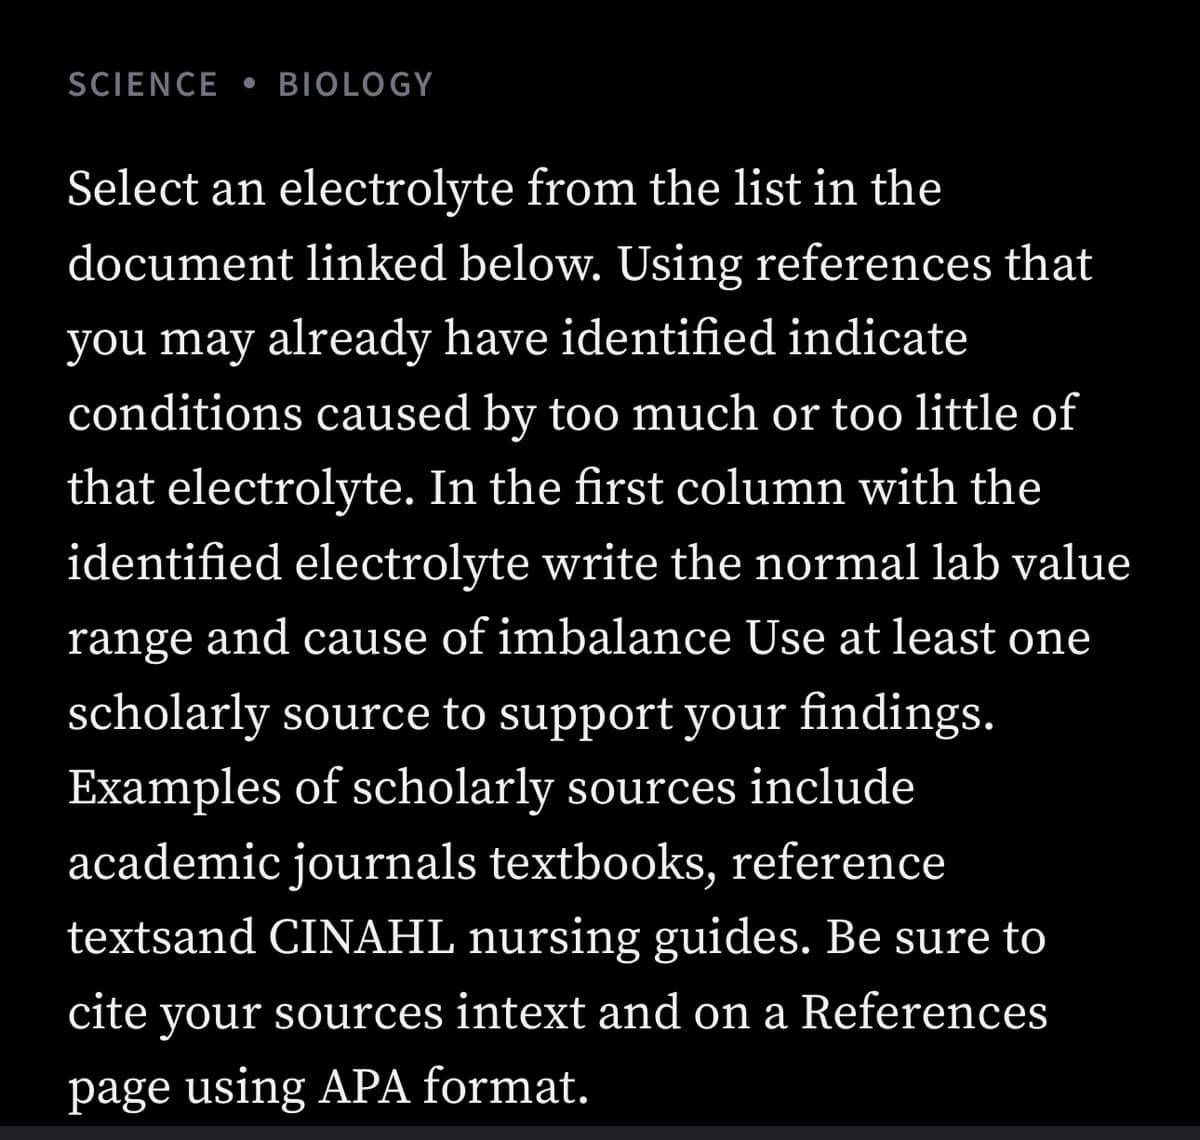 SCIENCE • BIOLOGY
Select an electrolyte from the list in the
document linked below. Using references that
you may already have identified indicate
conditions caused by too much or too little of
that electrolyte. In the first column with the
identified electrolyte write the normal lab value
range and cause of imbalance Use at least one
scholarly source to support your findings.
Examples of scholarly sources include
academic journals textbooks, reference
textsand CINAHL nursing guides. Be sure to
cite your sources intext and on a References
page using APA format.